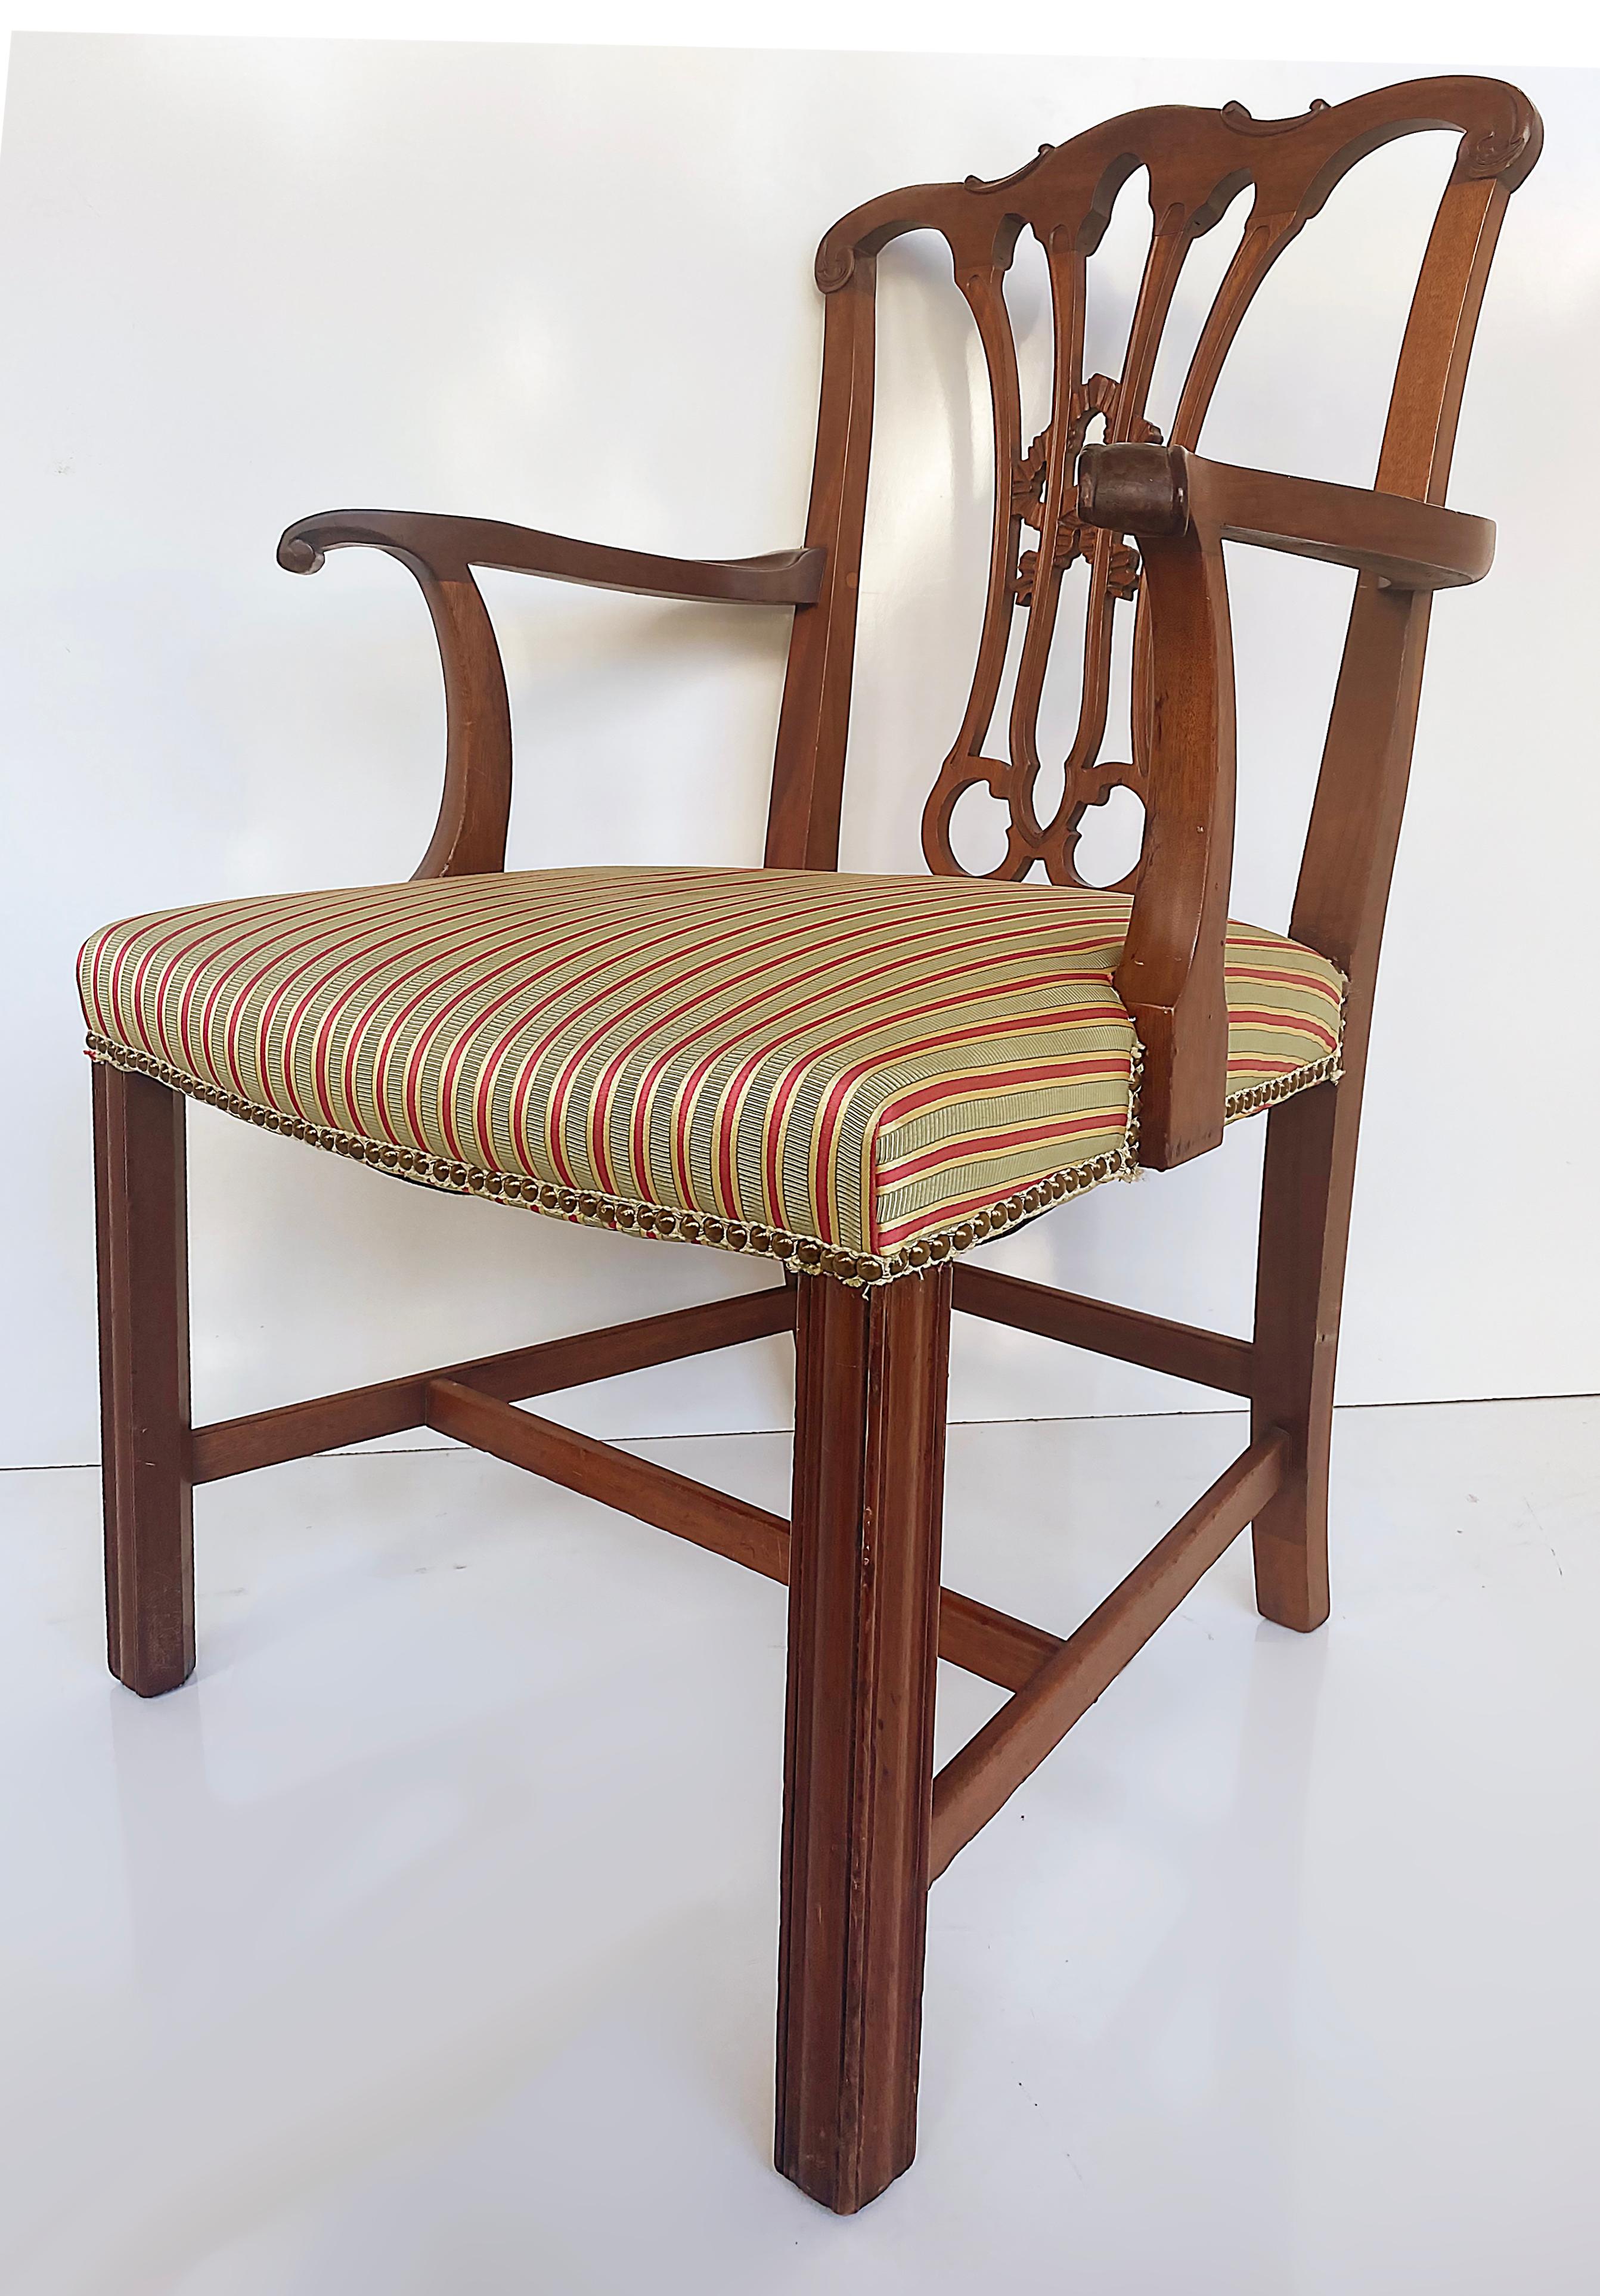 Chippendale Style Mahogany Slat Back Armchair with Upholstered Seat Cushion For Sale 2